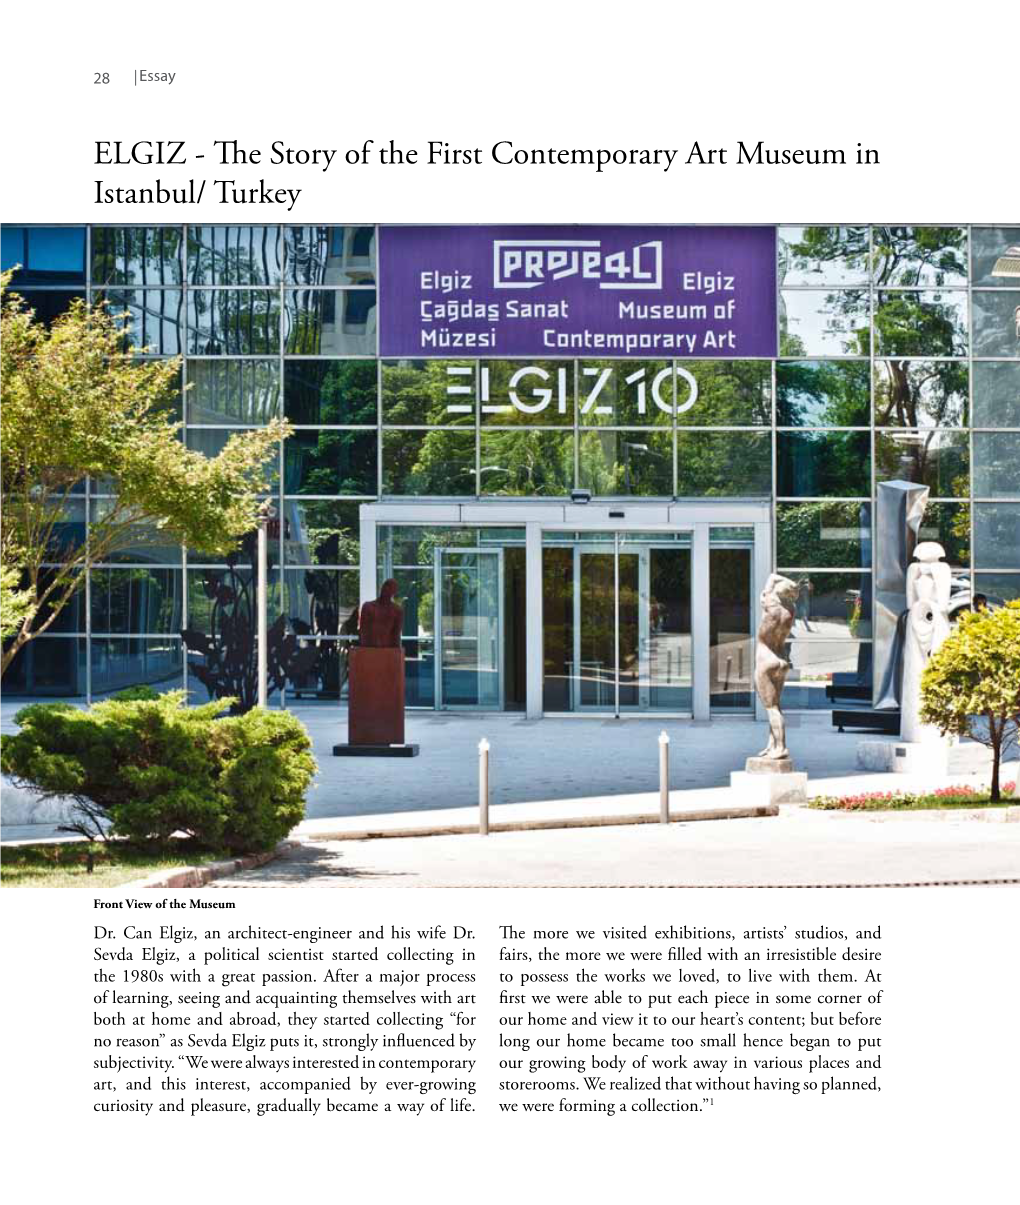 ELGIZ - the Story of the First Contemporary Art Museum in Istanbul/ Turkey